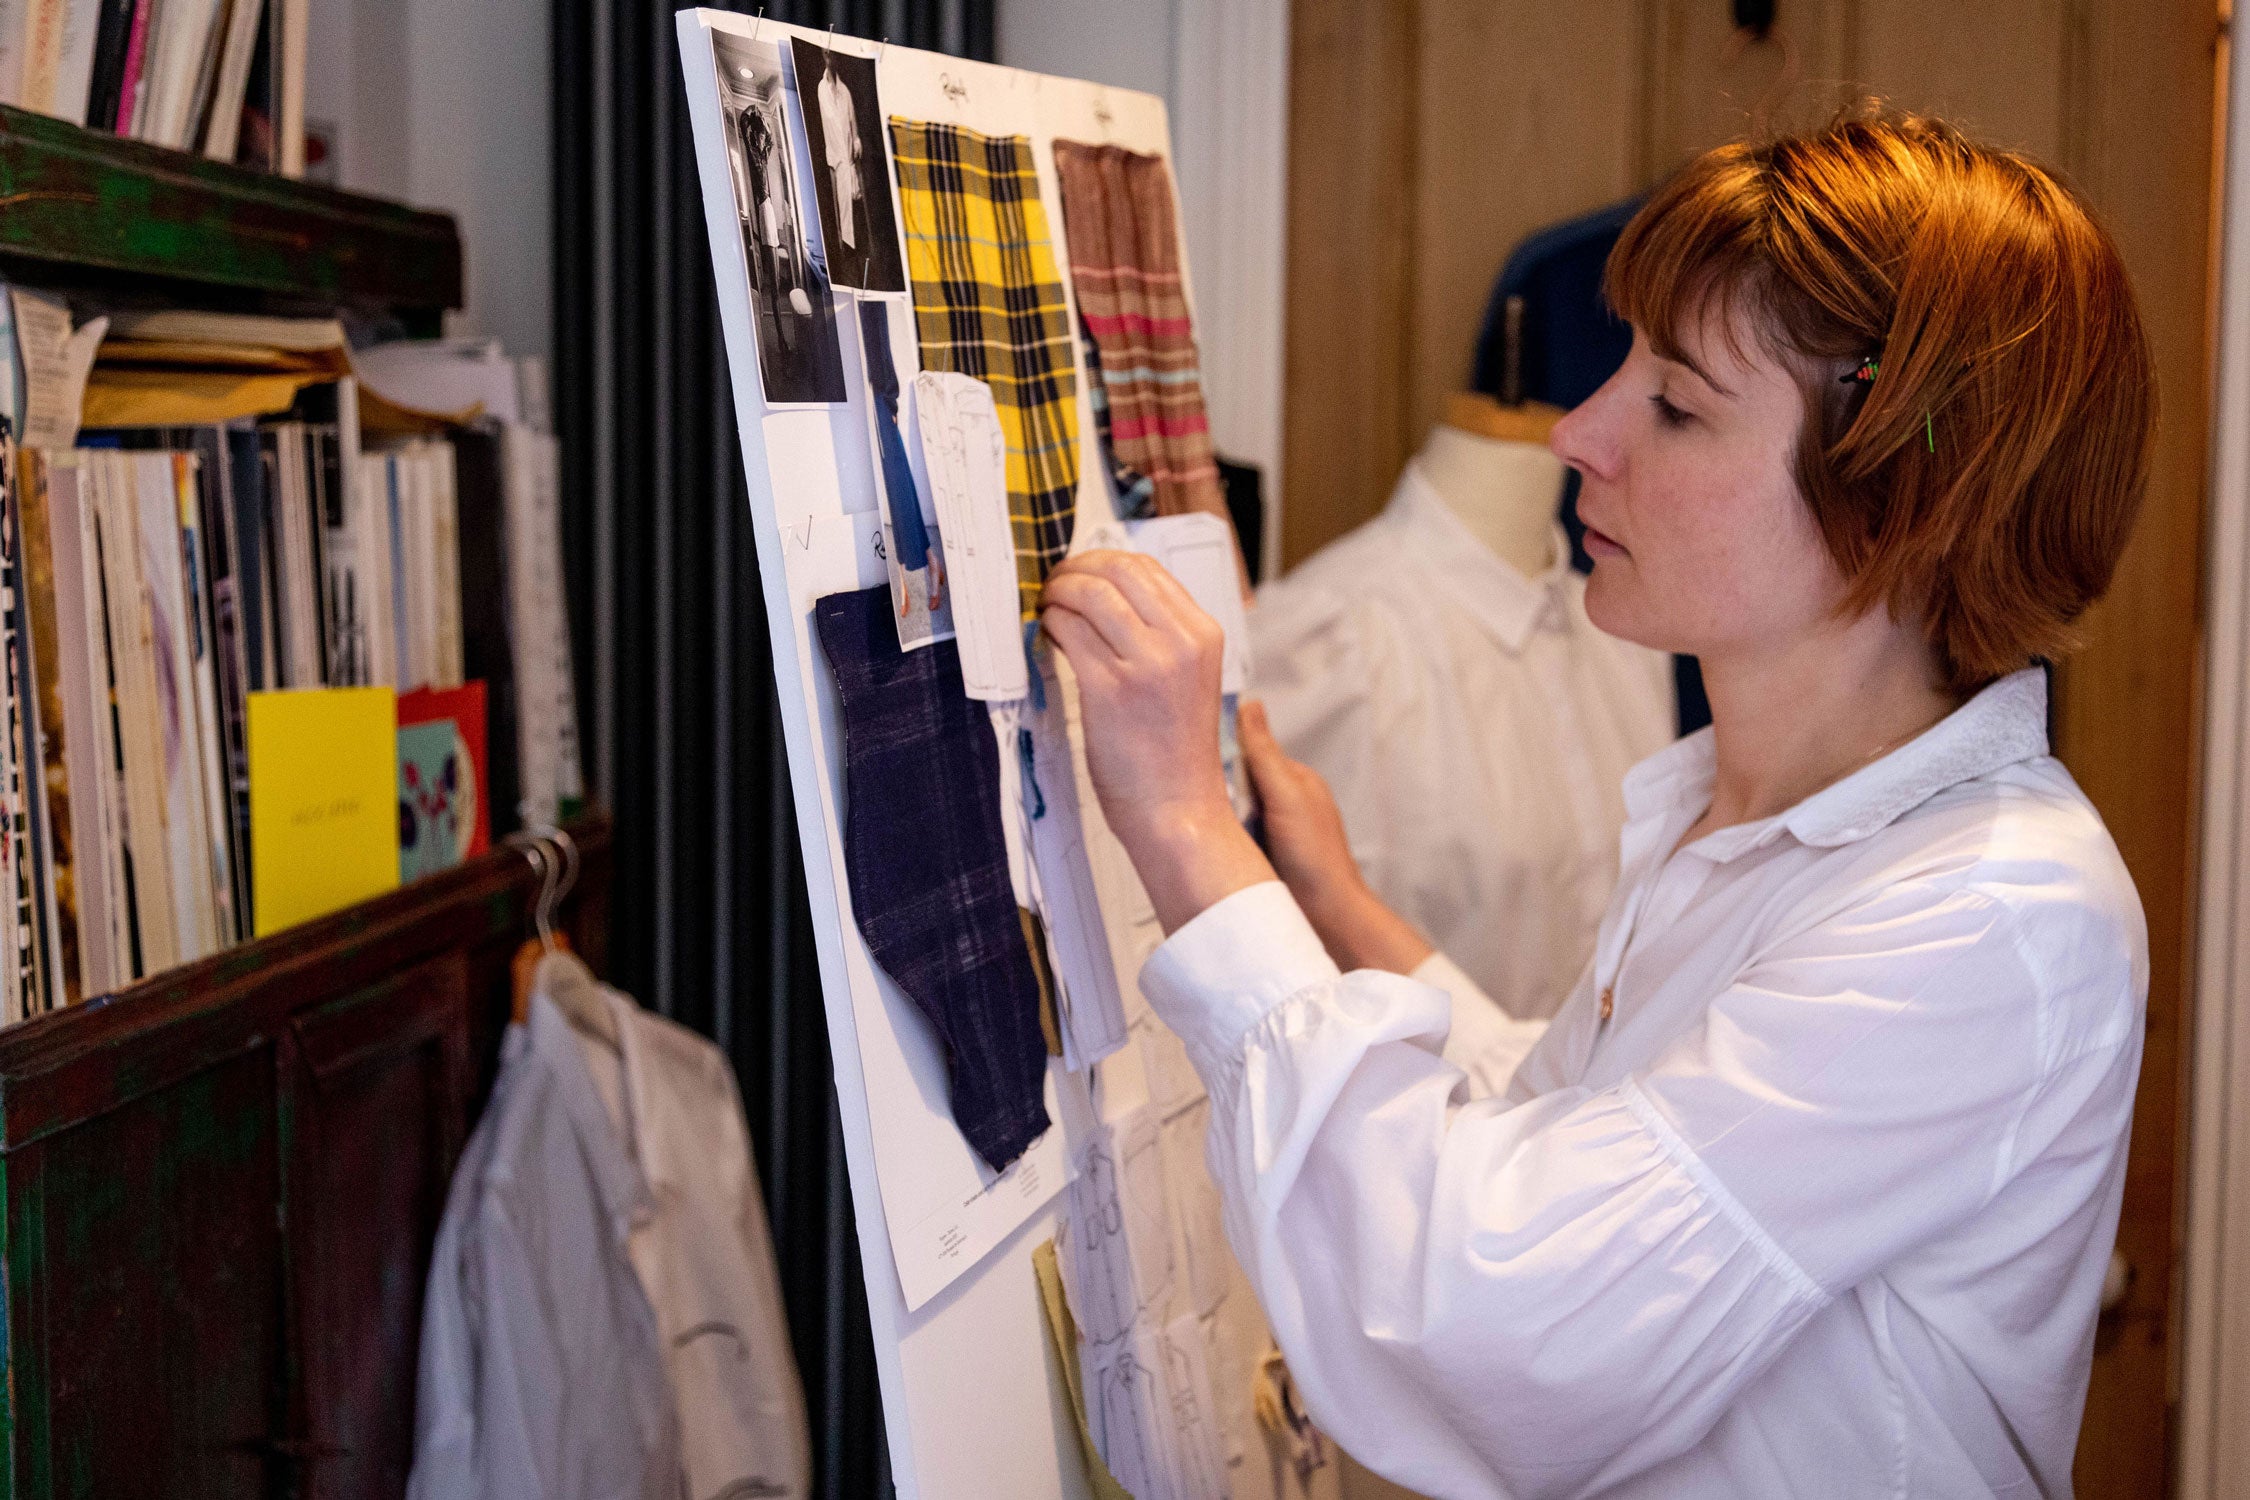 Saywood founder, Harriet, reviewing the fabrics and collection on a board in the London studio. Various fabric can be seen, with vintage magazines on a shelf in the background.